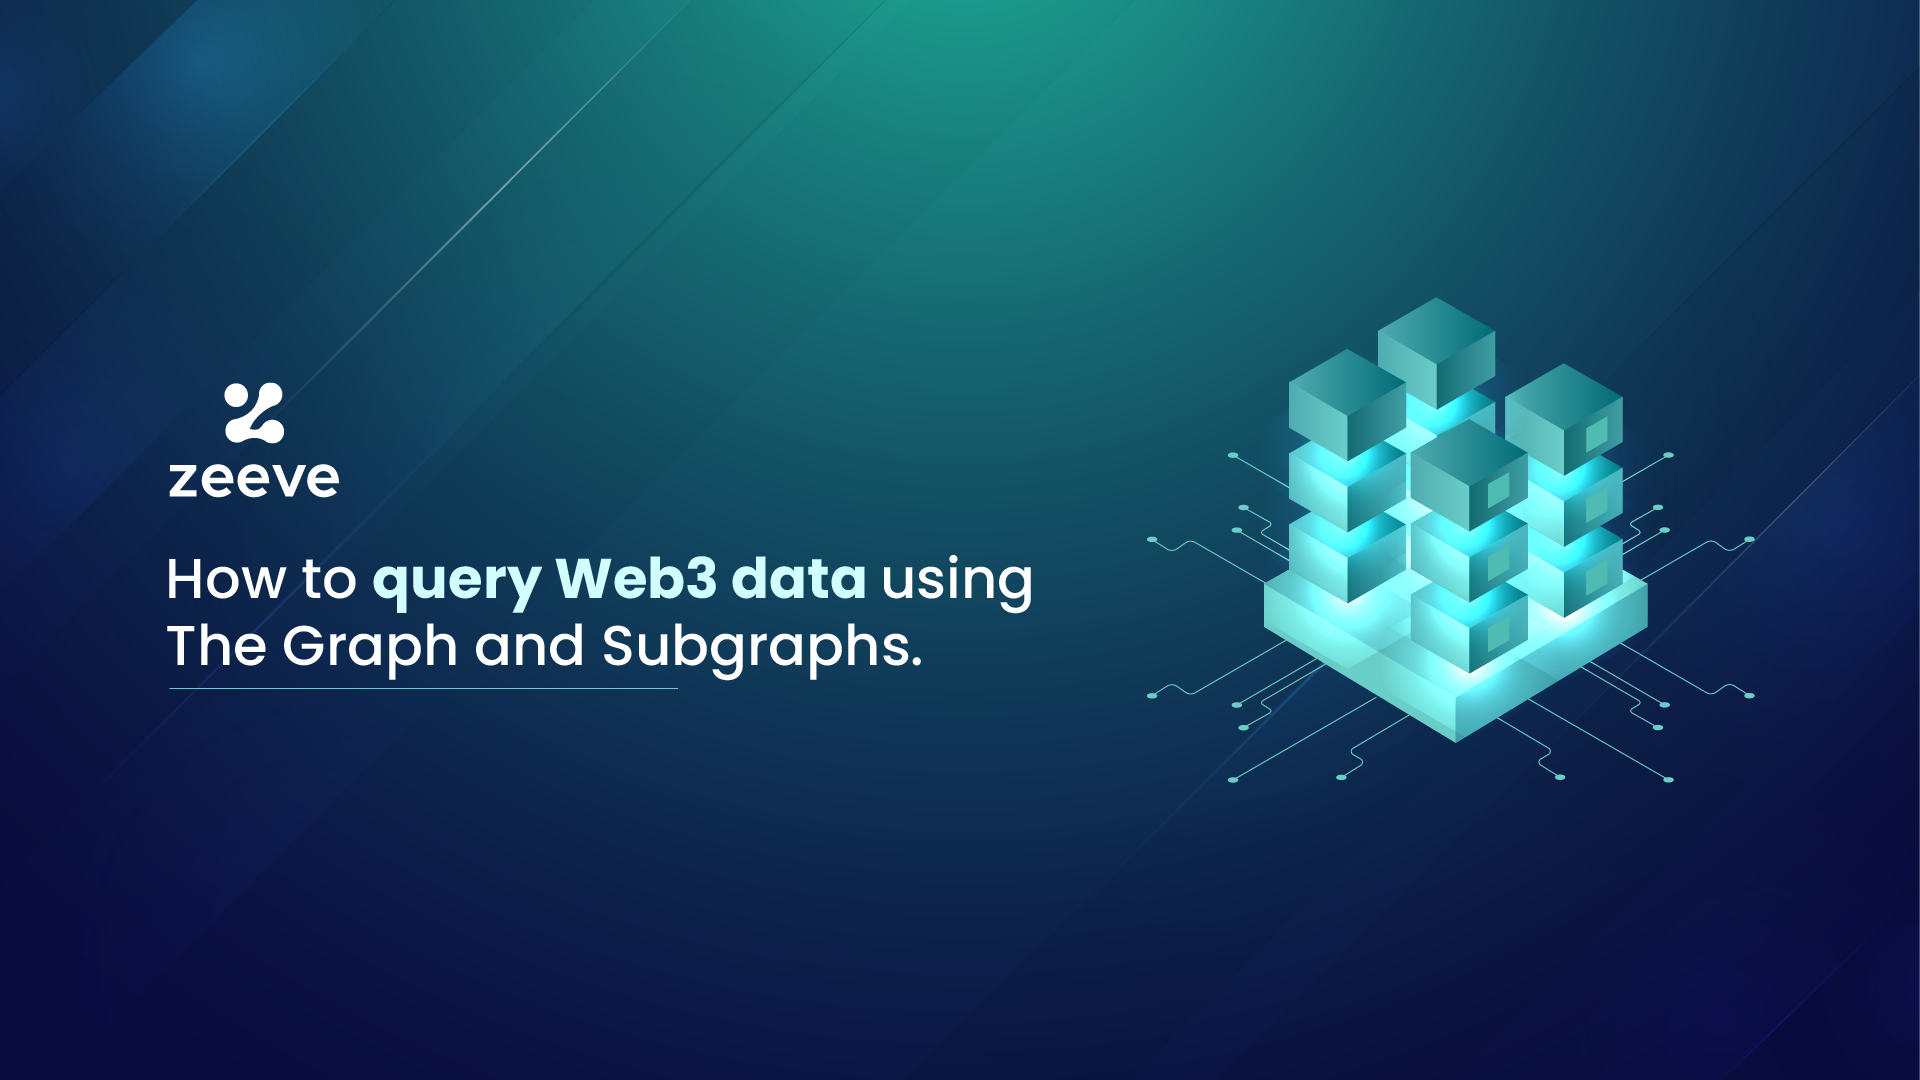 query Web3 data using The Graph Protocol and Subgraphs